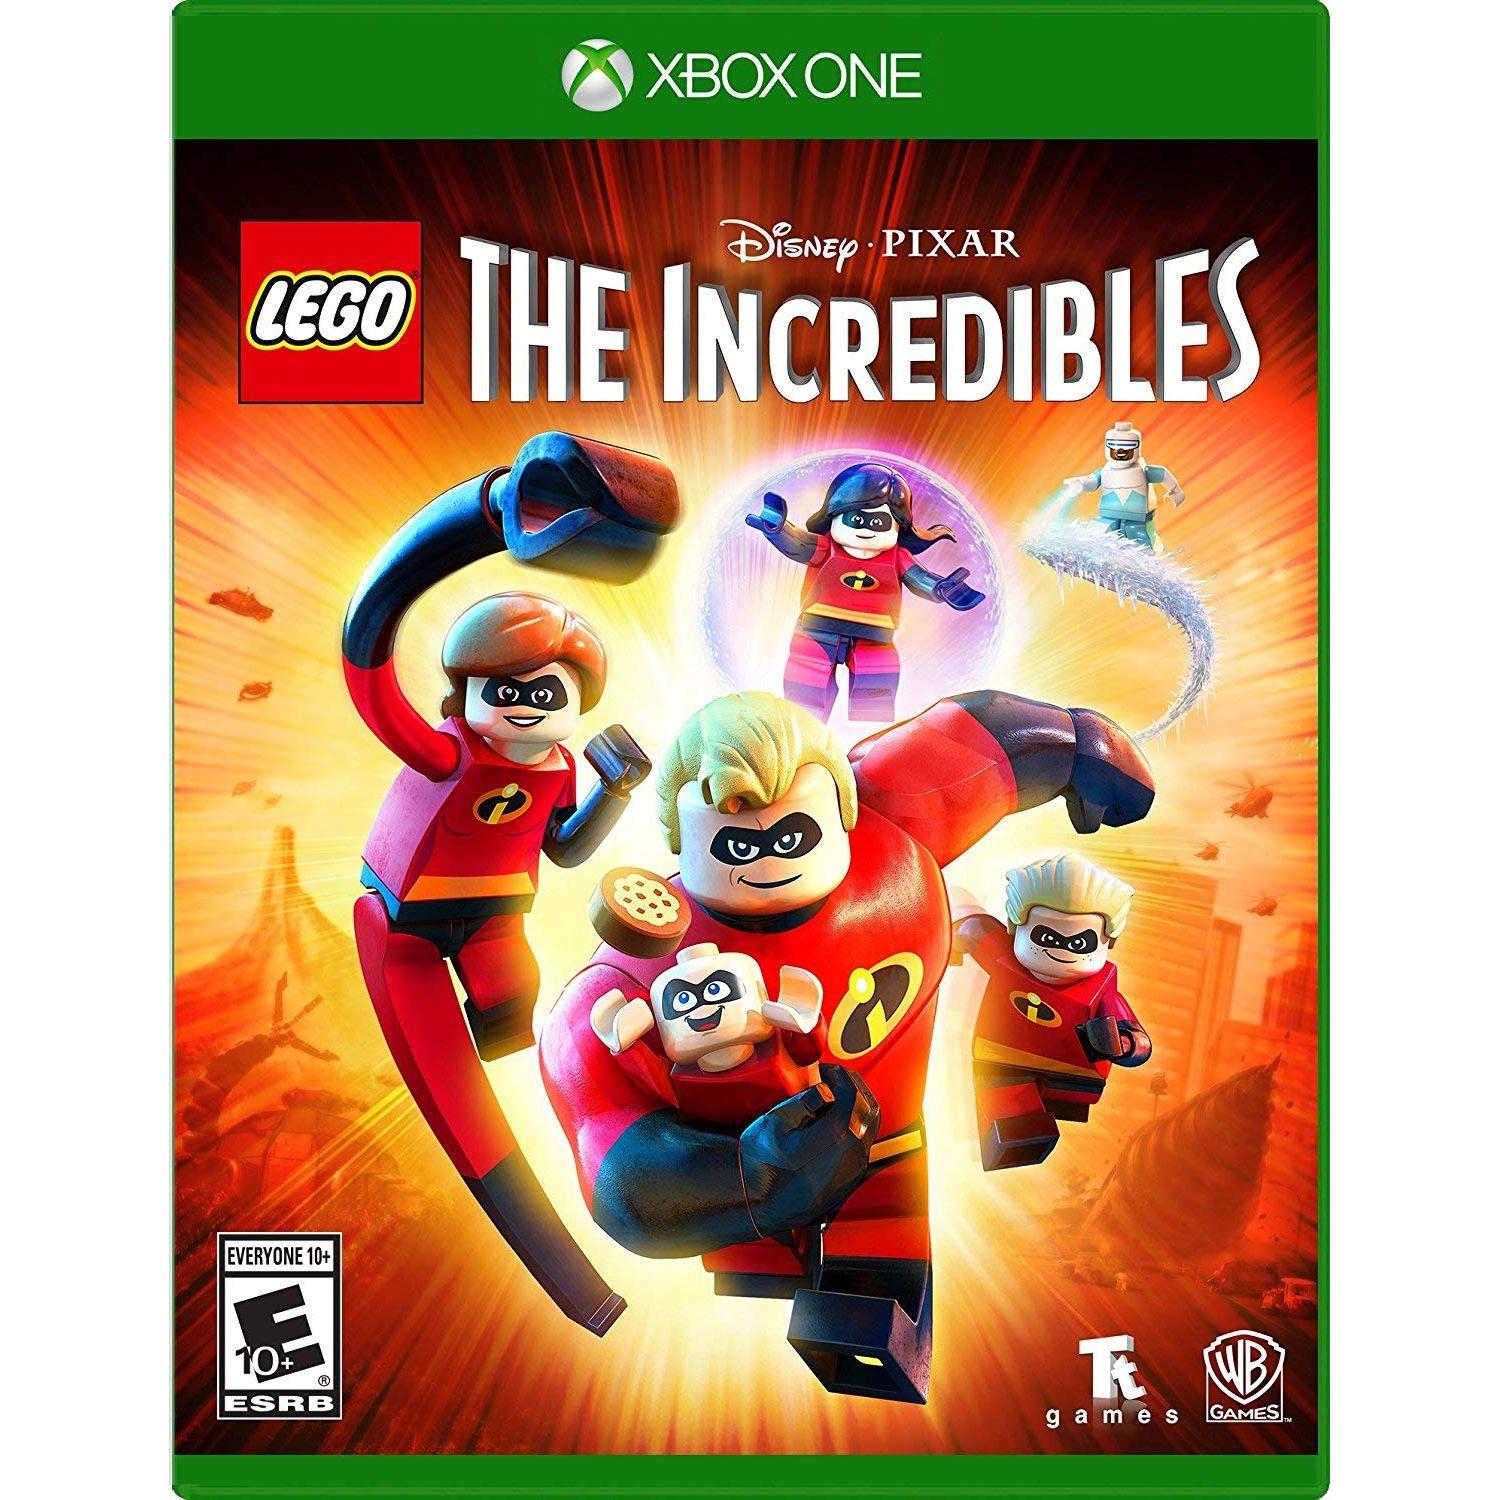 XBOX ONE - LEGO The Incredibles